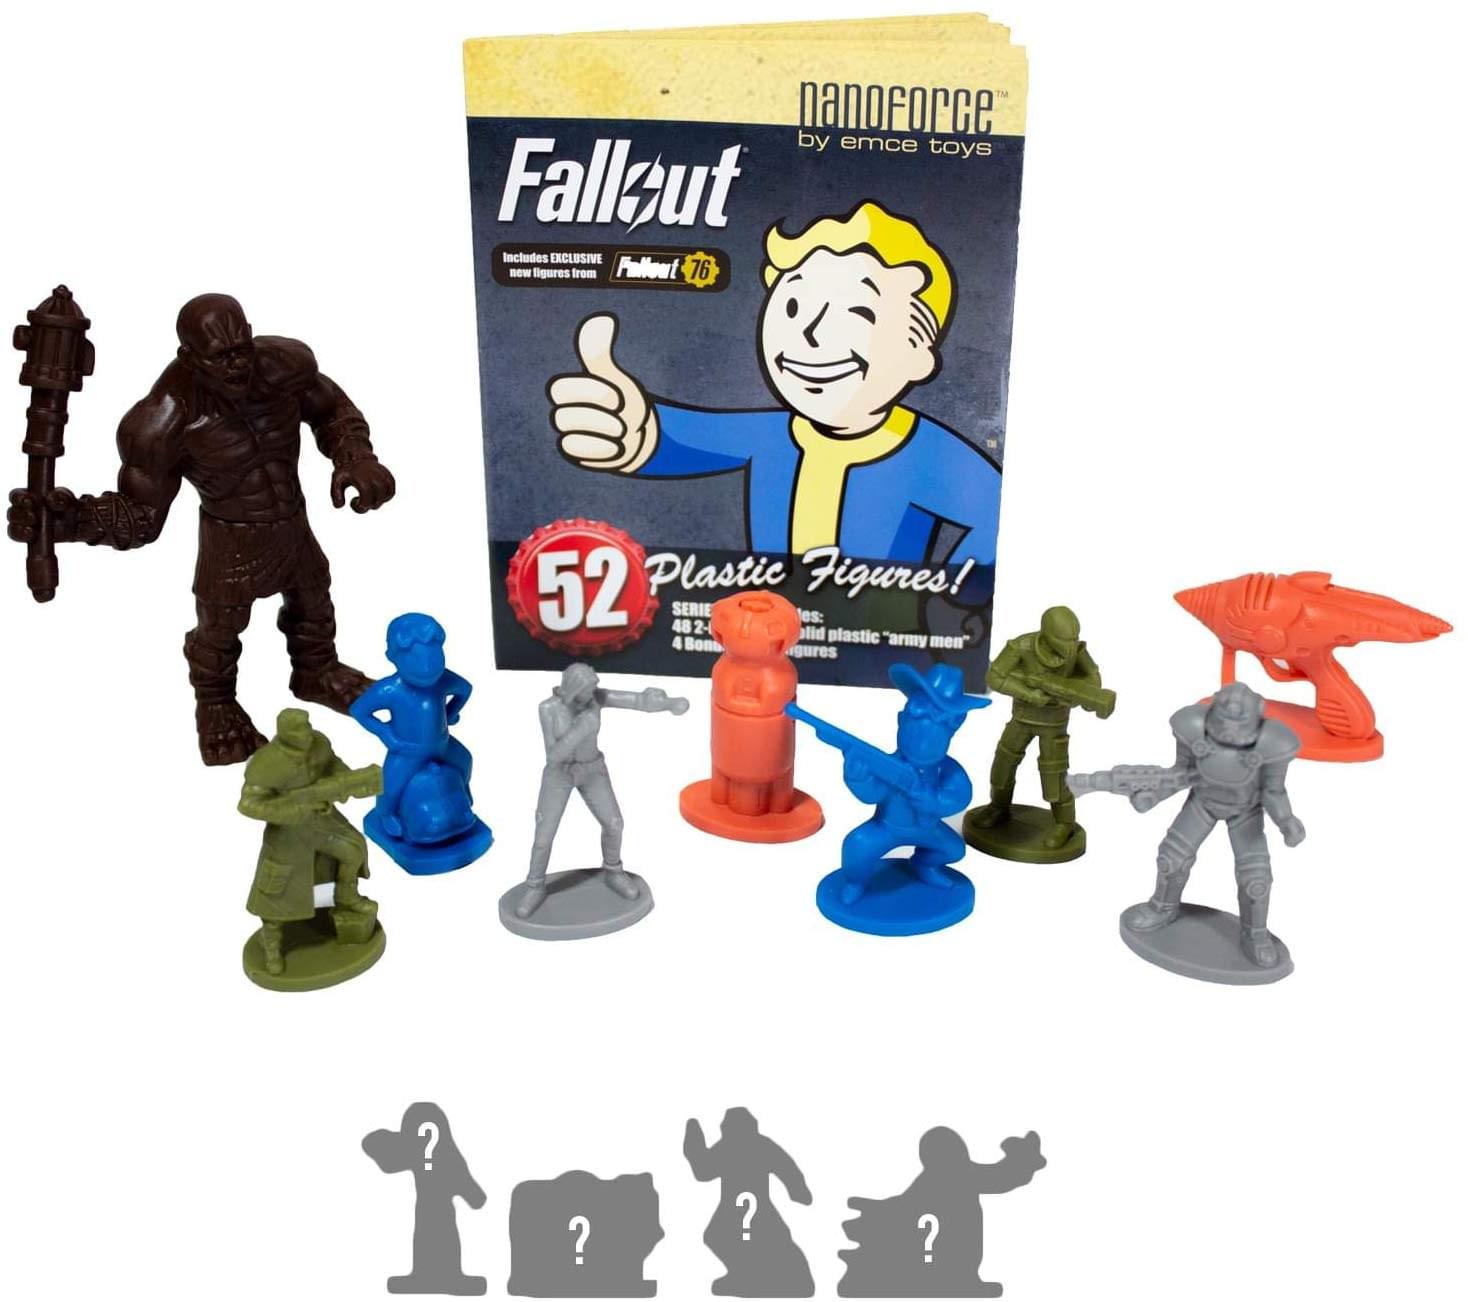 Fallout Nanoforce S1 Army Builder Figures - Boxed Version 4